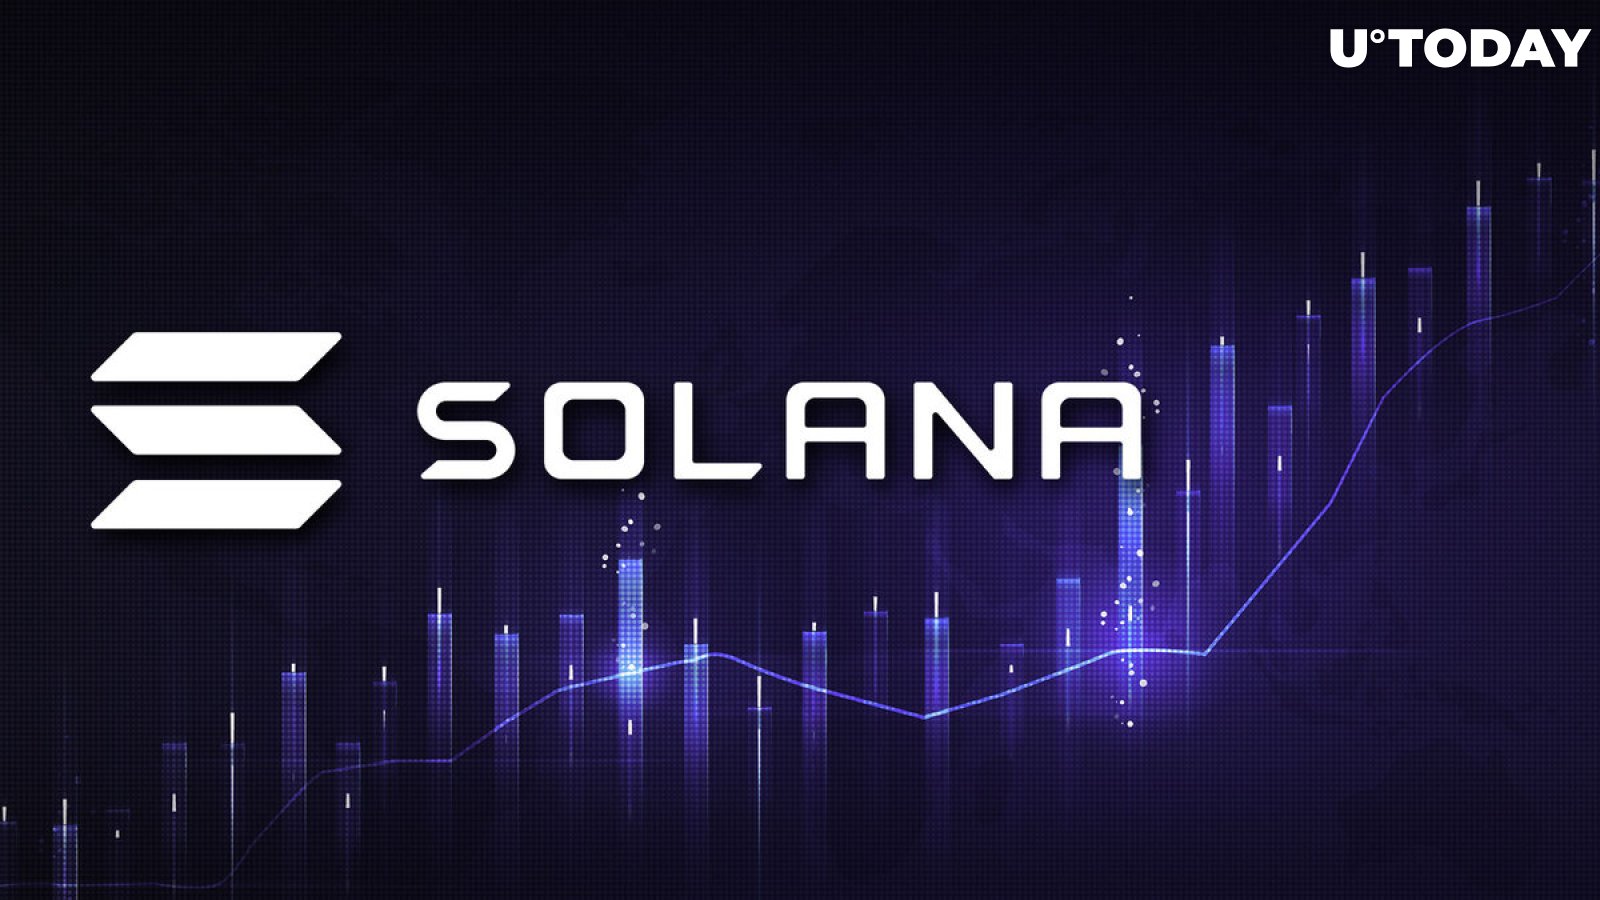 Solana (SOL) Soars 22%, Here Are 3 Things to Watch Out For